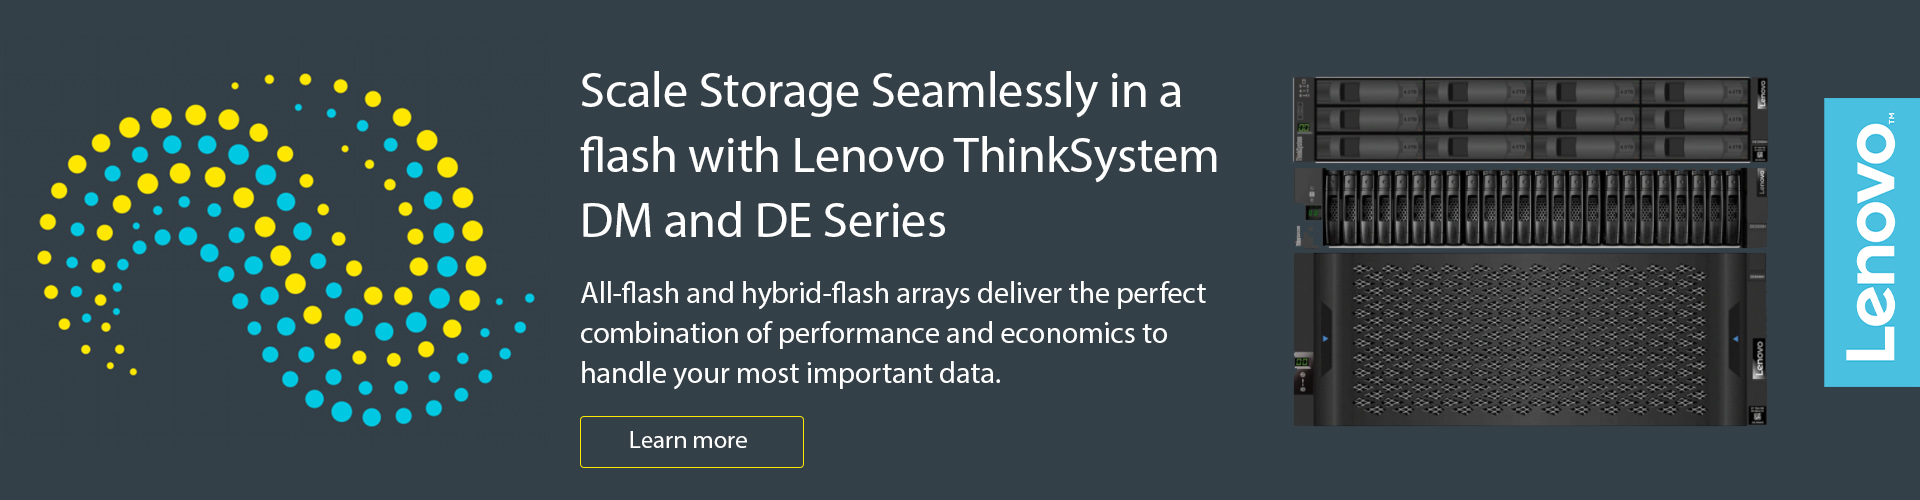 Scale storage seamlessly in a flash with Lenovo ThinkSystem DM and DE series